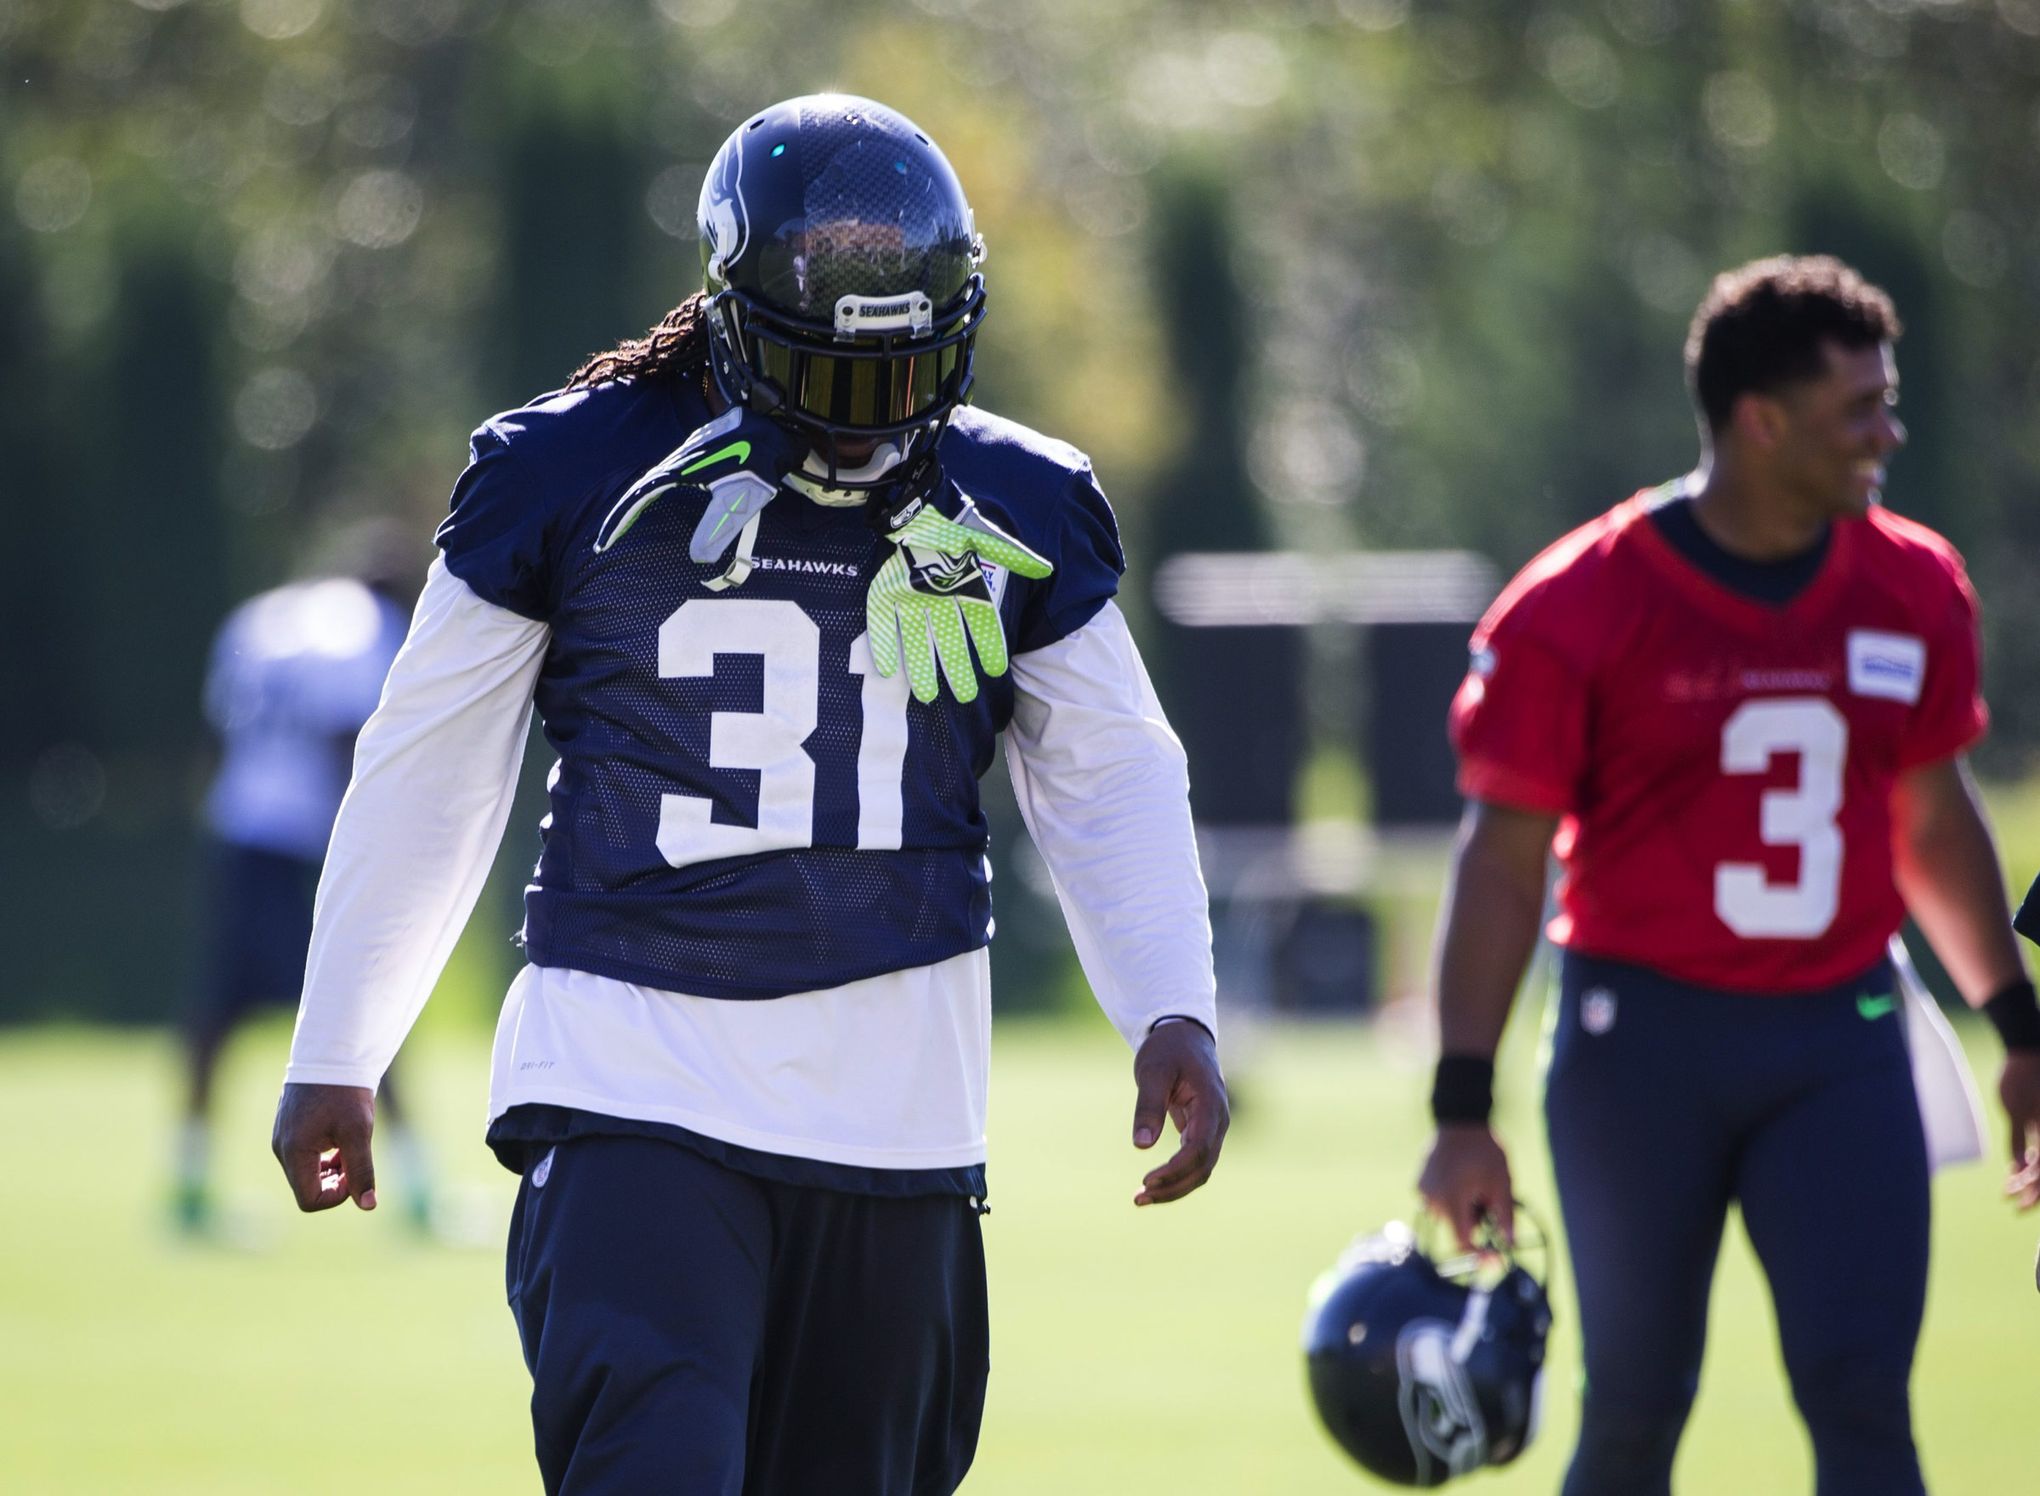 No, that's not Kam Chancellor at Seahawks' practice, that's